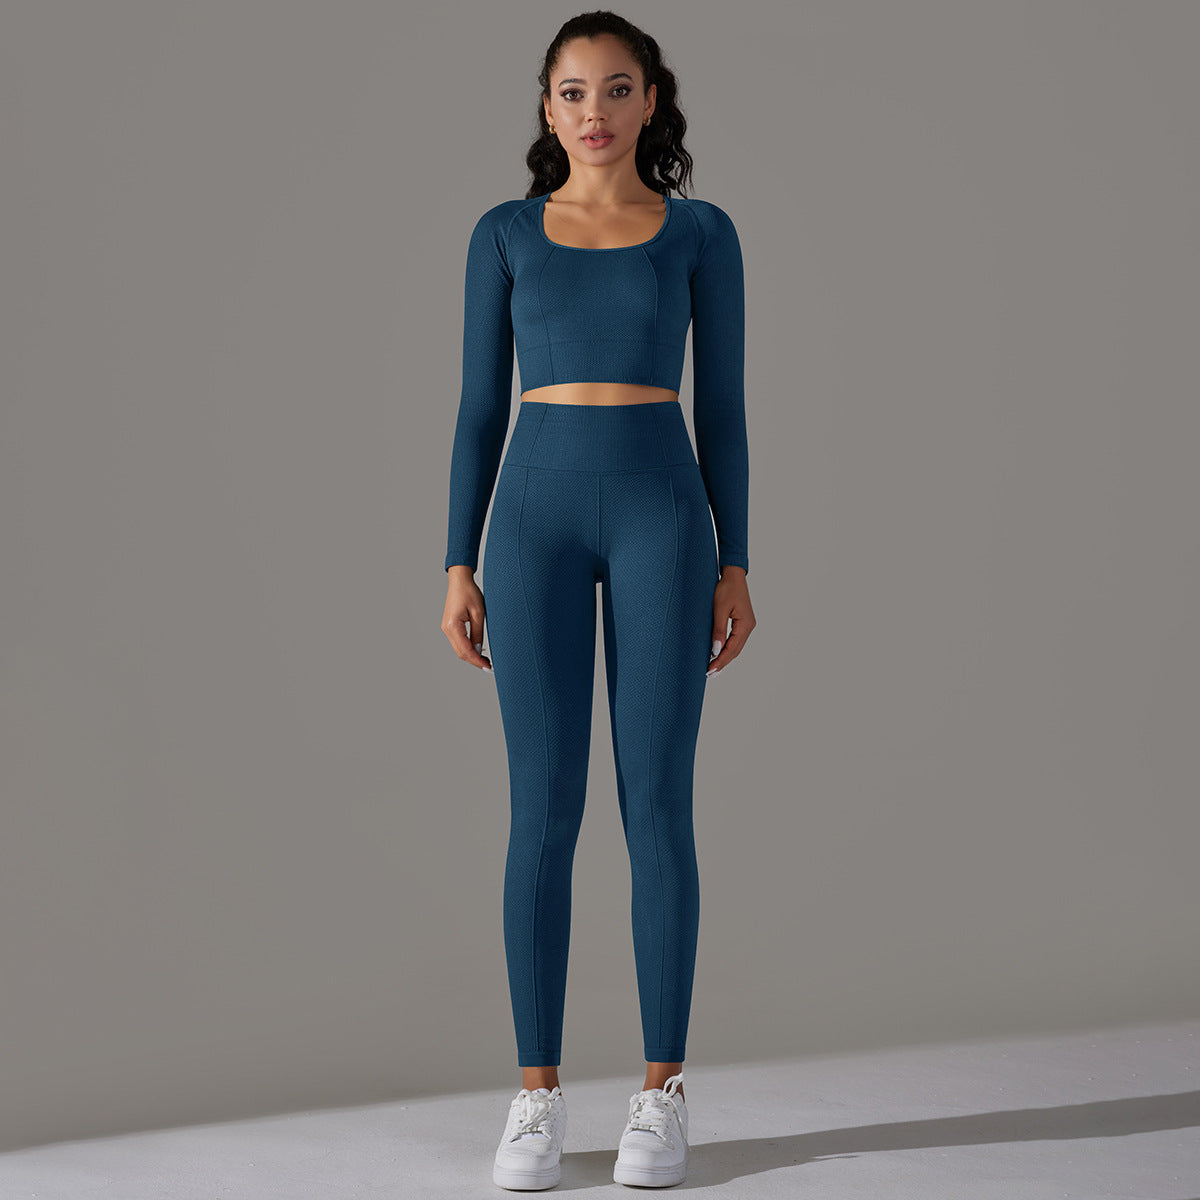 BamBam Seamless Knitting Solid Color Jacquard Low-Cut Tight Fitting Long-Sleeved Yoga Suit Sports Fitness Two-Piece Set - BamBam